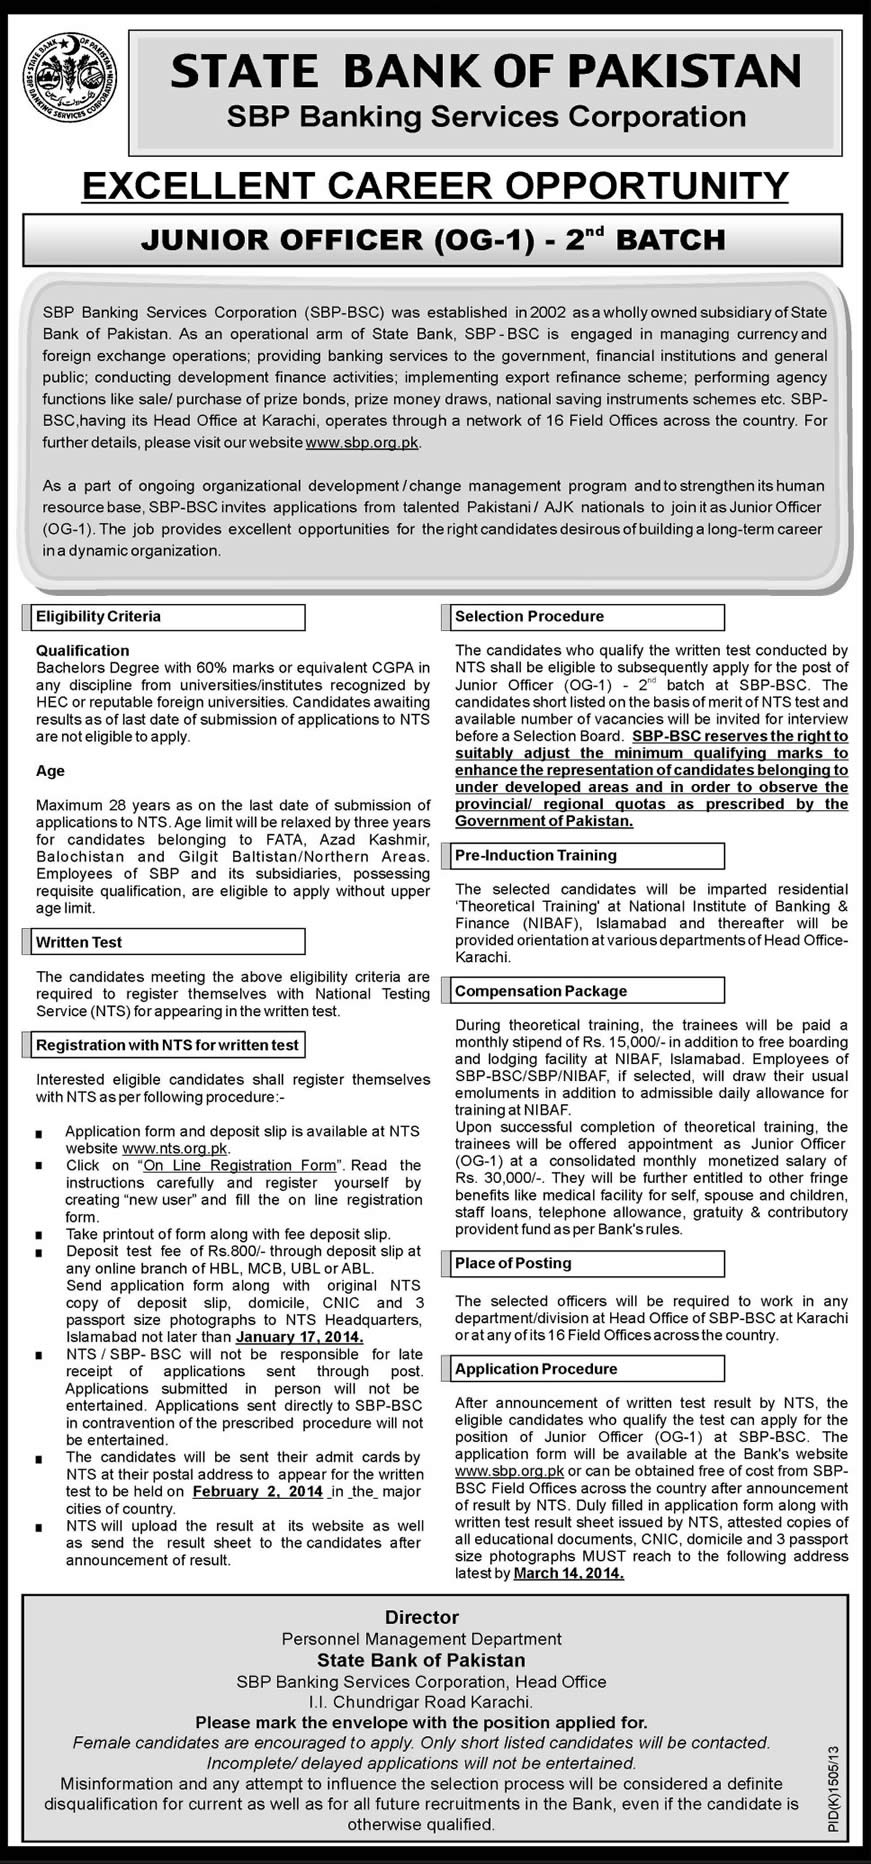 State Bank of Pakistan Jobs NTS December 2013 2014 January for Junior Officers